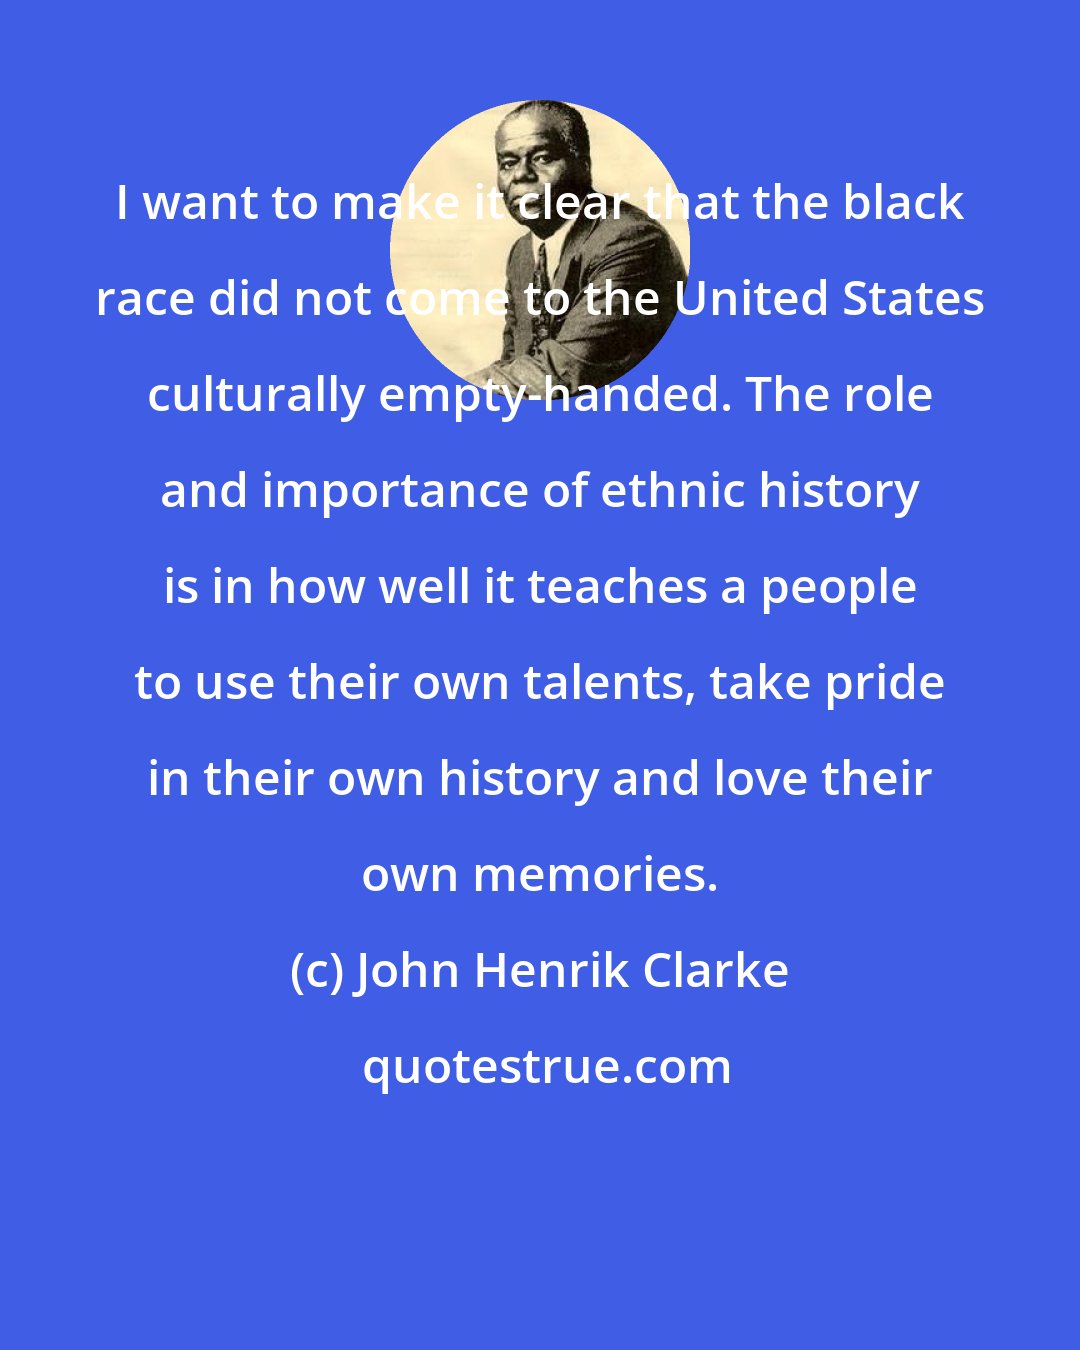 John Henrik Clarke: I want to make it clear that the black race did not come to the United States culturally empty-handed. The role and importance of ethnic history is in how well it teaches a people to use their own talents, take pride in their own history and love their own memories.